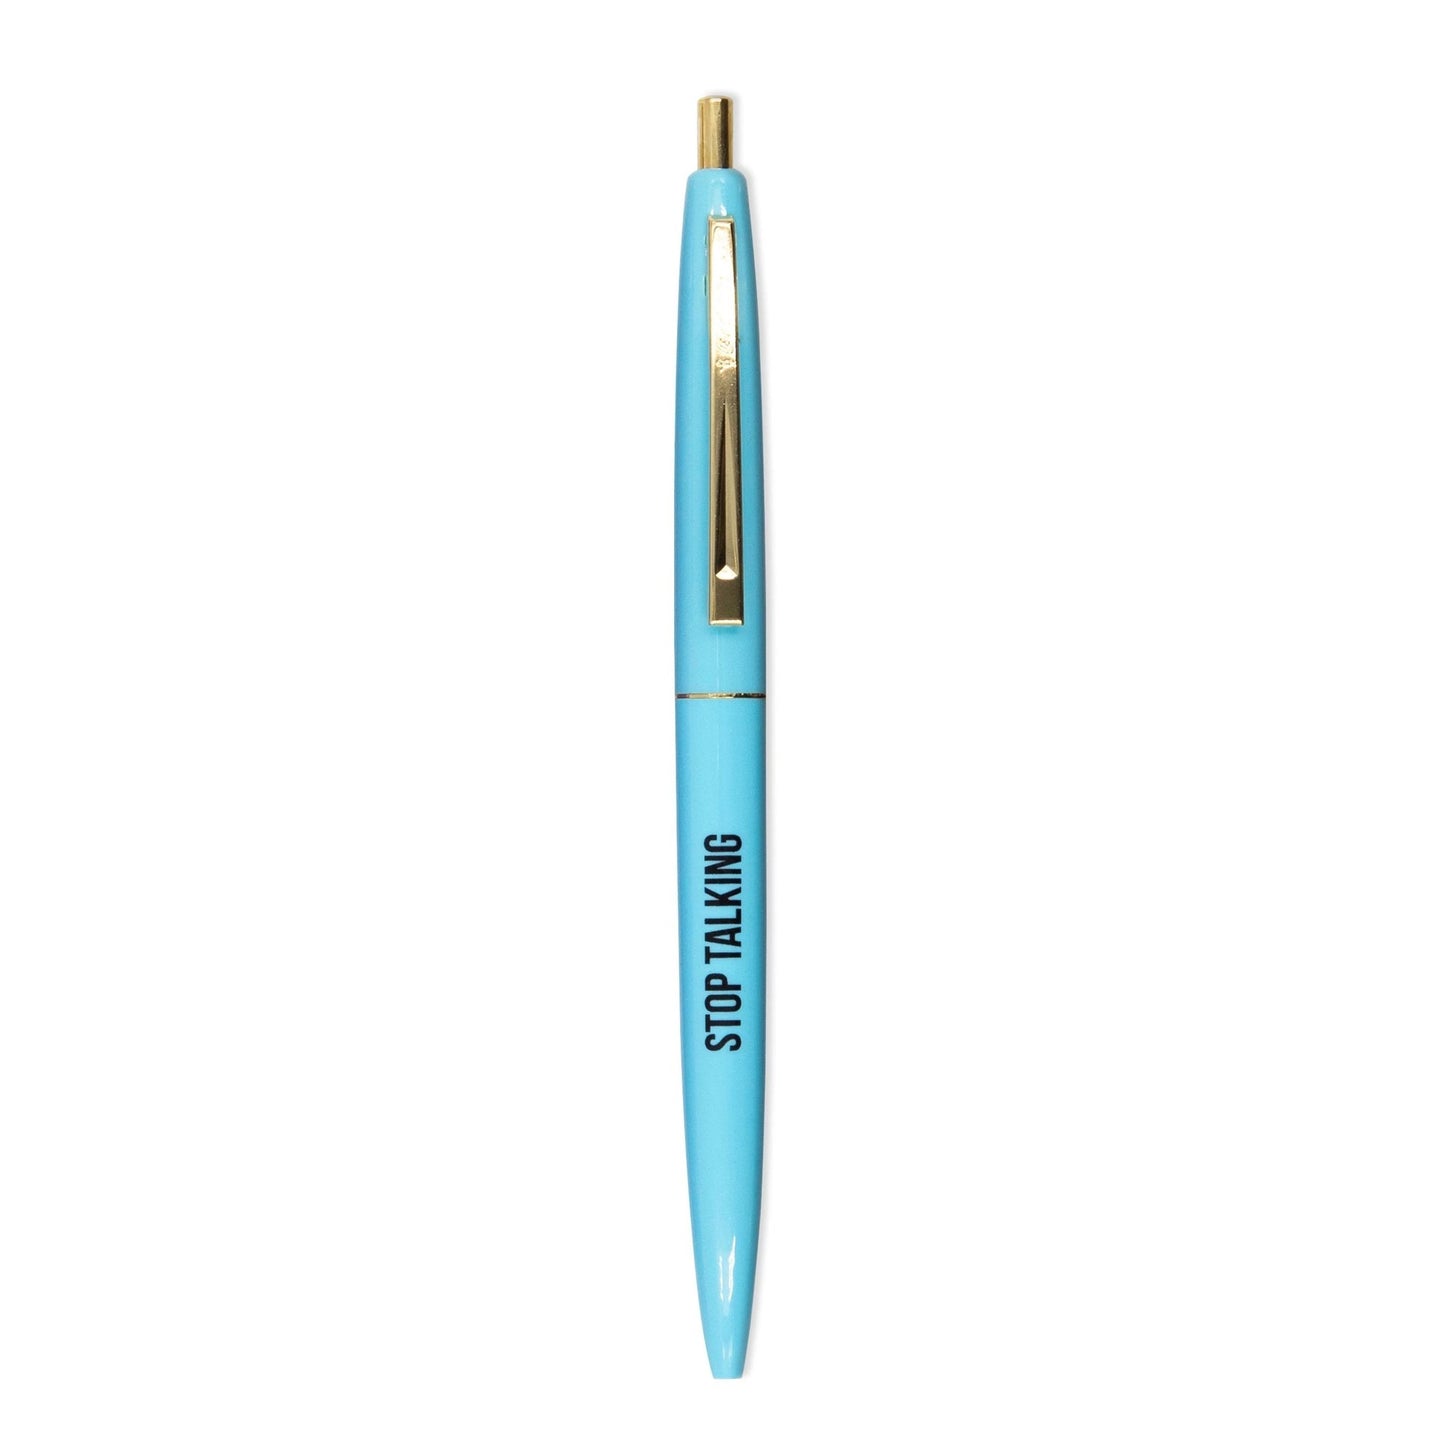 Stop Talking Pen in Aqua with Black Lettering and Gold Accents